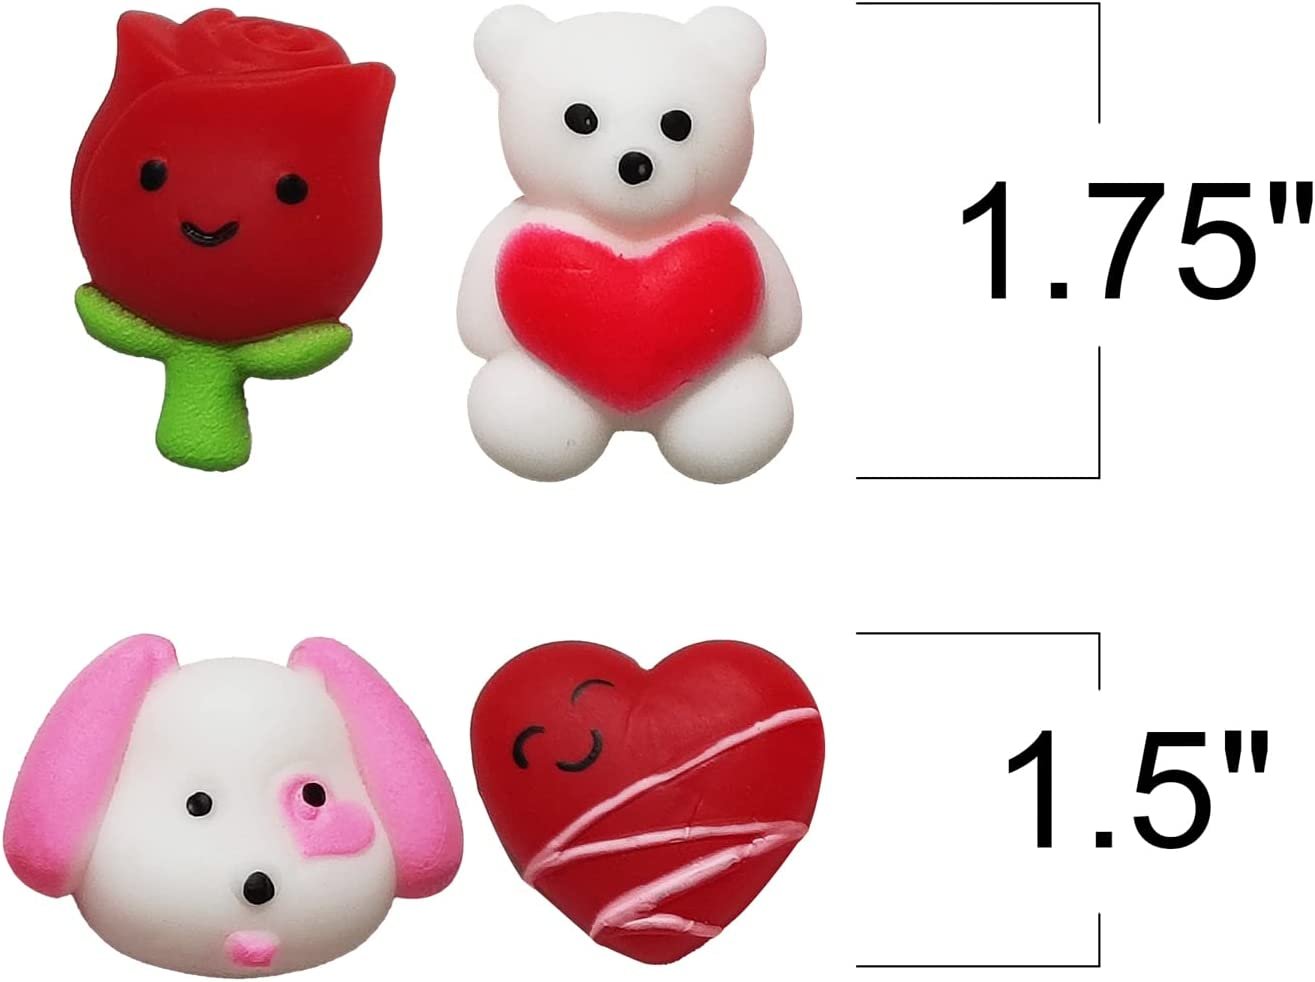 Mini Valentines Day Squishy Toys, 12 Cute Designs, Stress Relief Toys - Set of 48